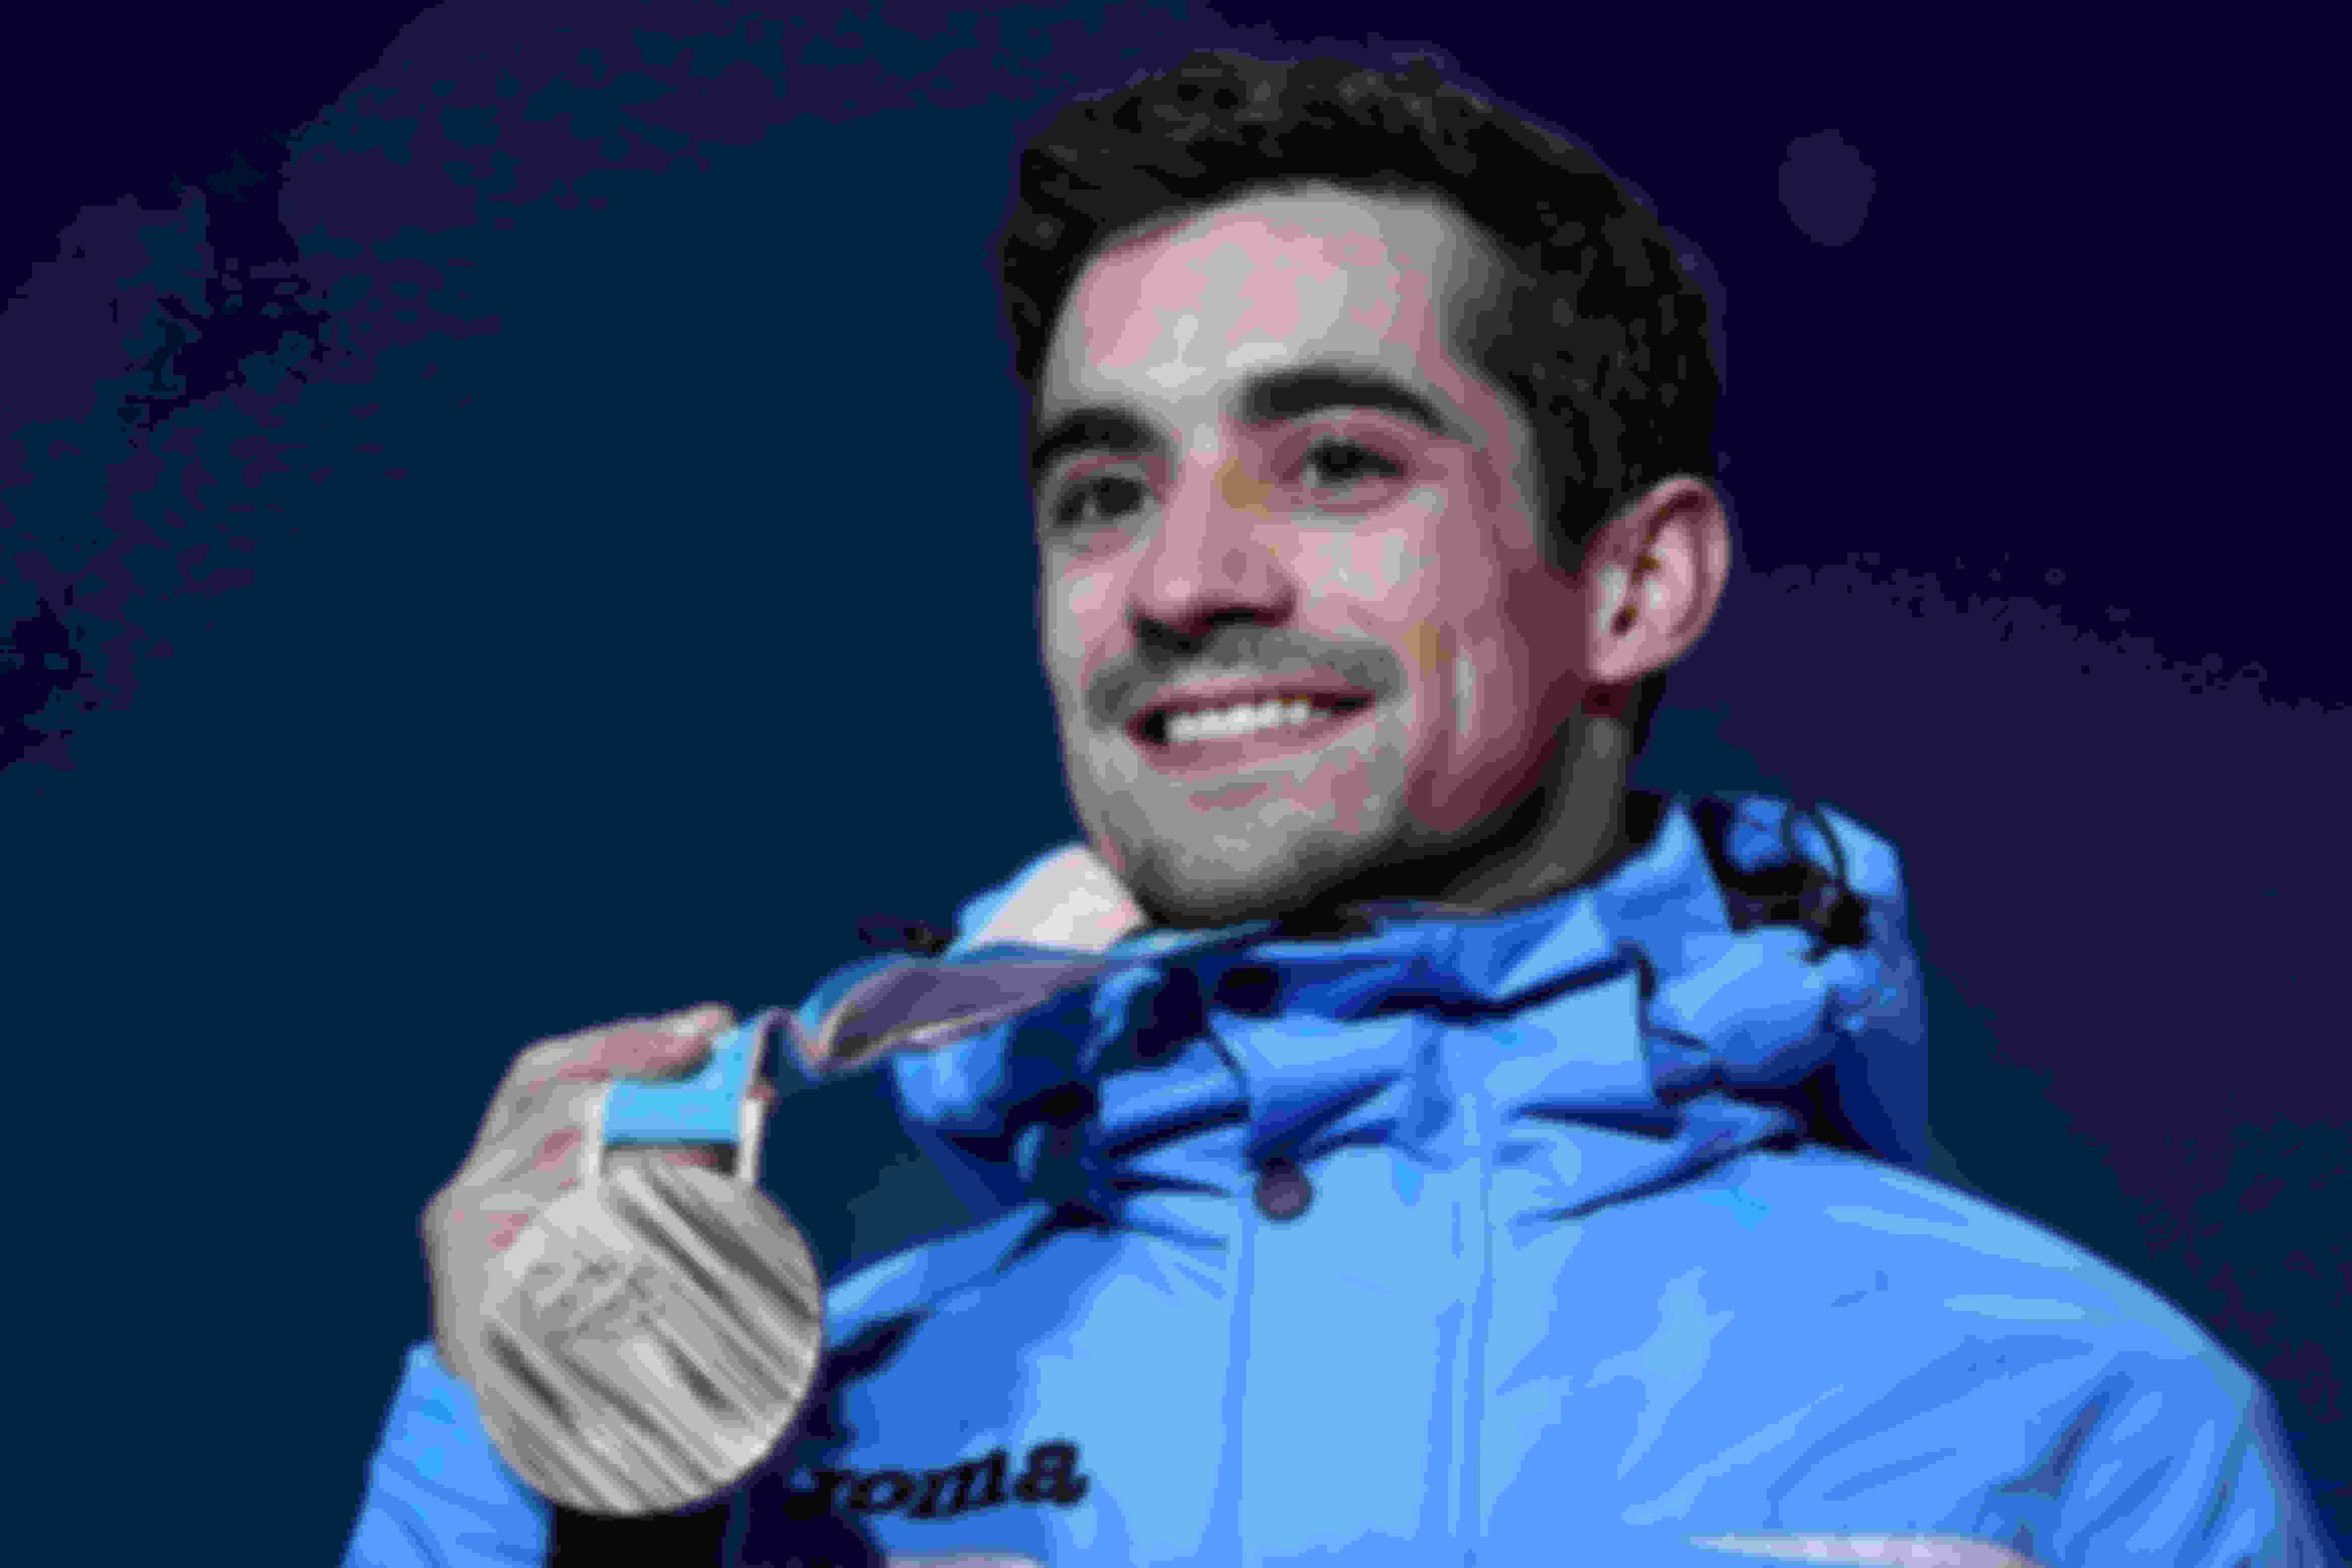  Bronze medalist Javier Fernandez celebrates during the Men's Figure Skating medal ceremony at the PyeongChang 2018 Winter Olympic Games